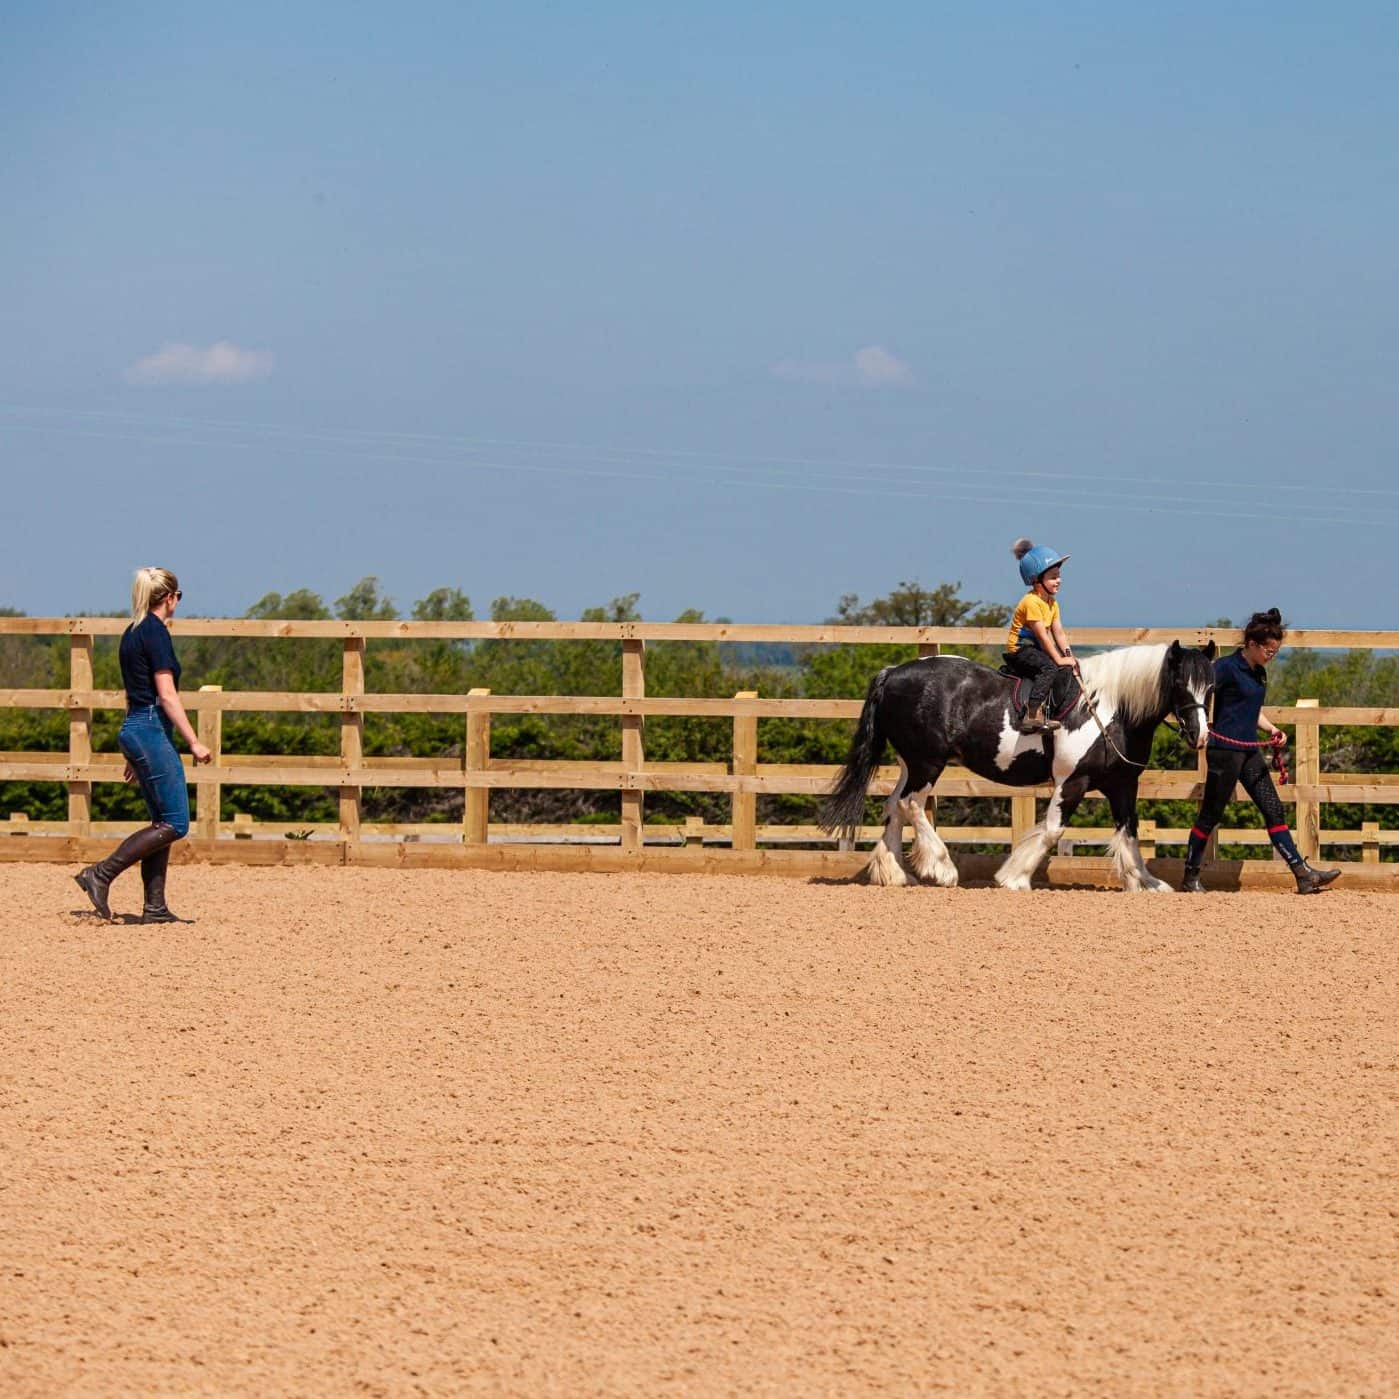 Child being led on pony during riding lesson in outdoor school